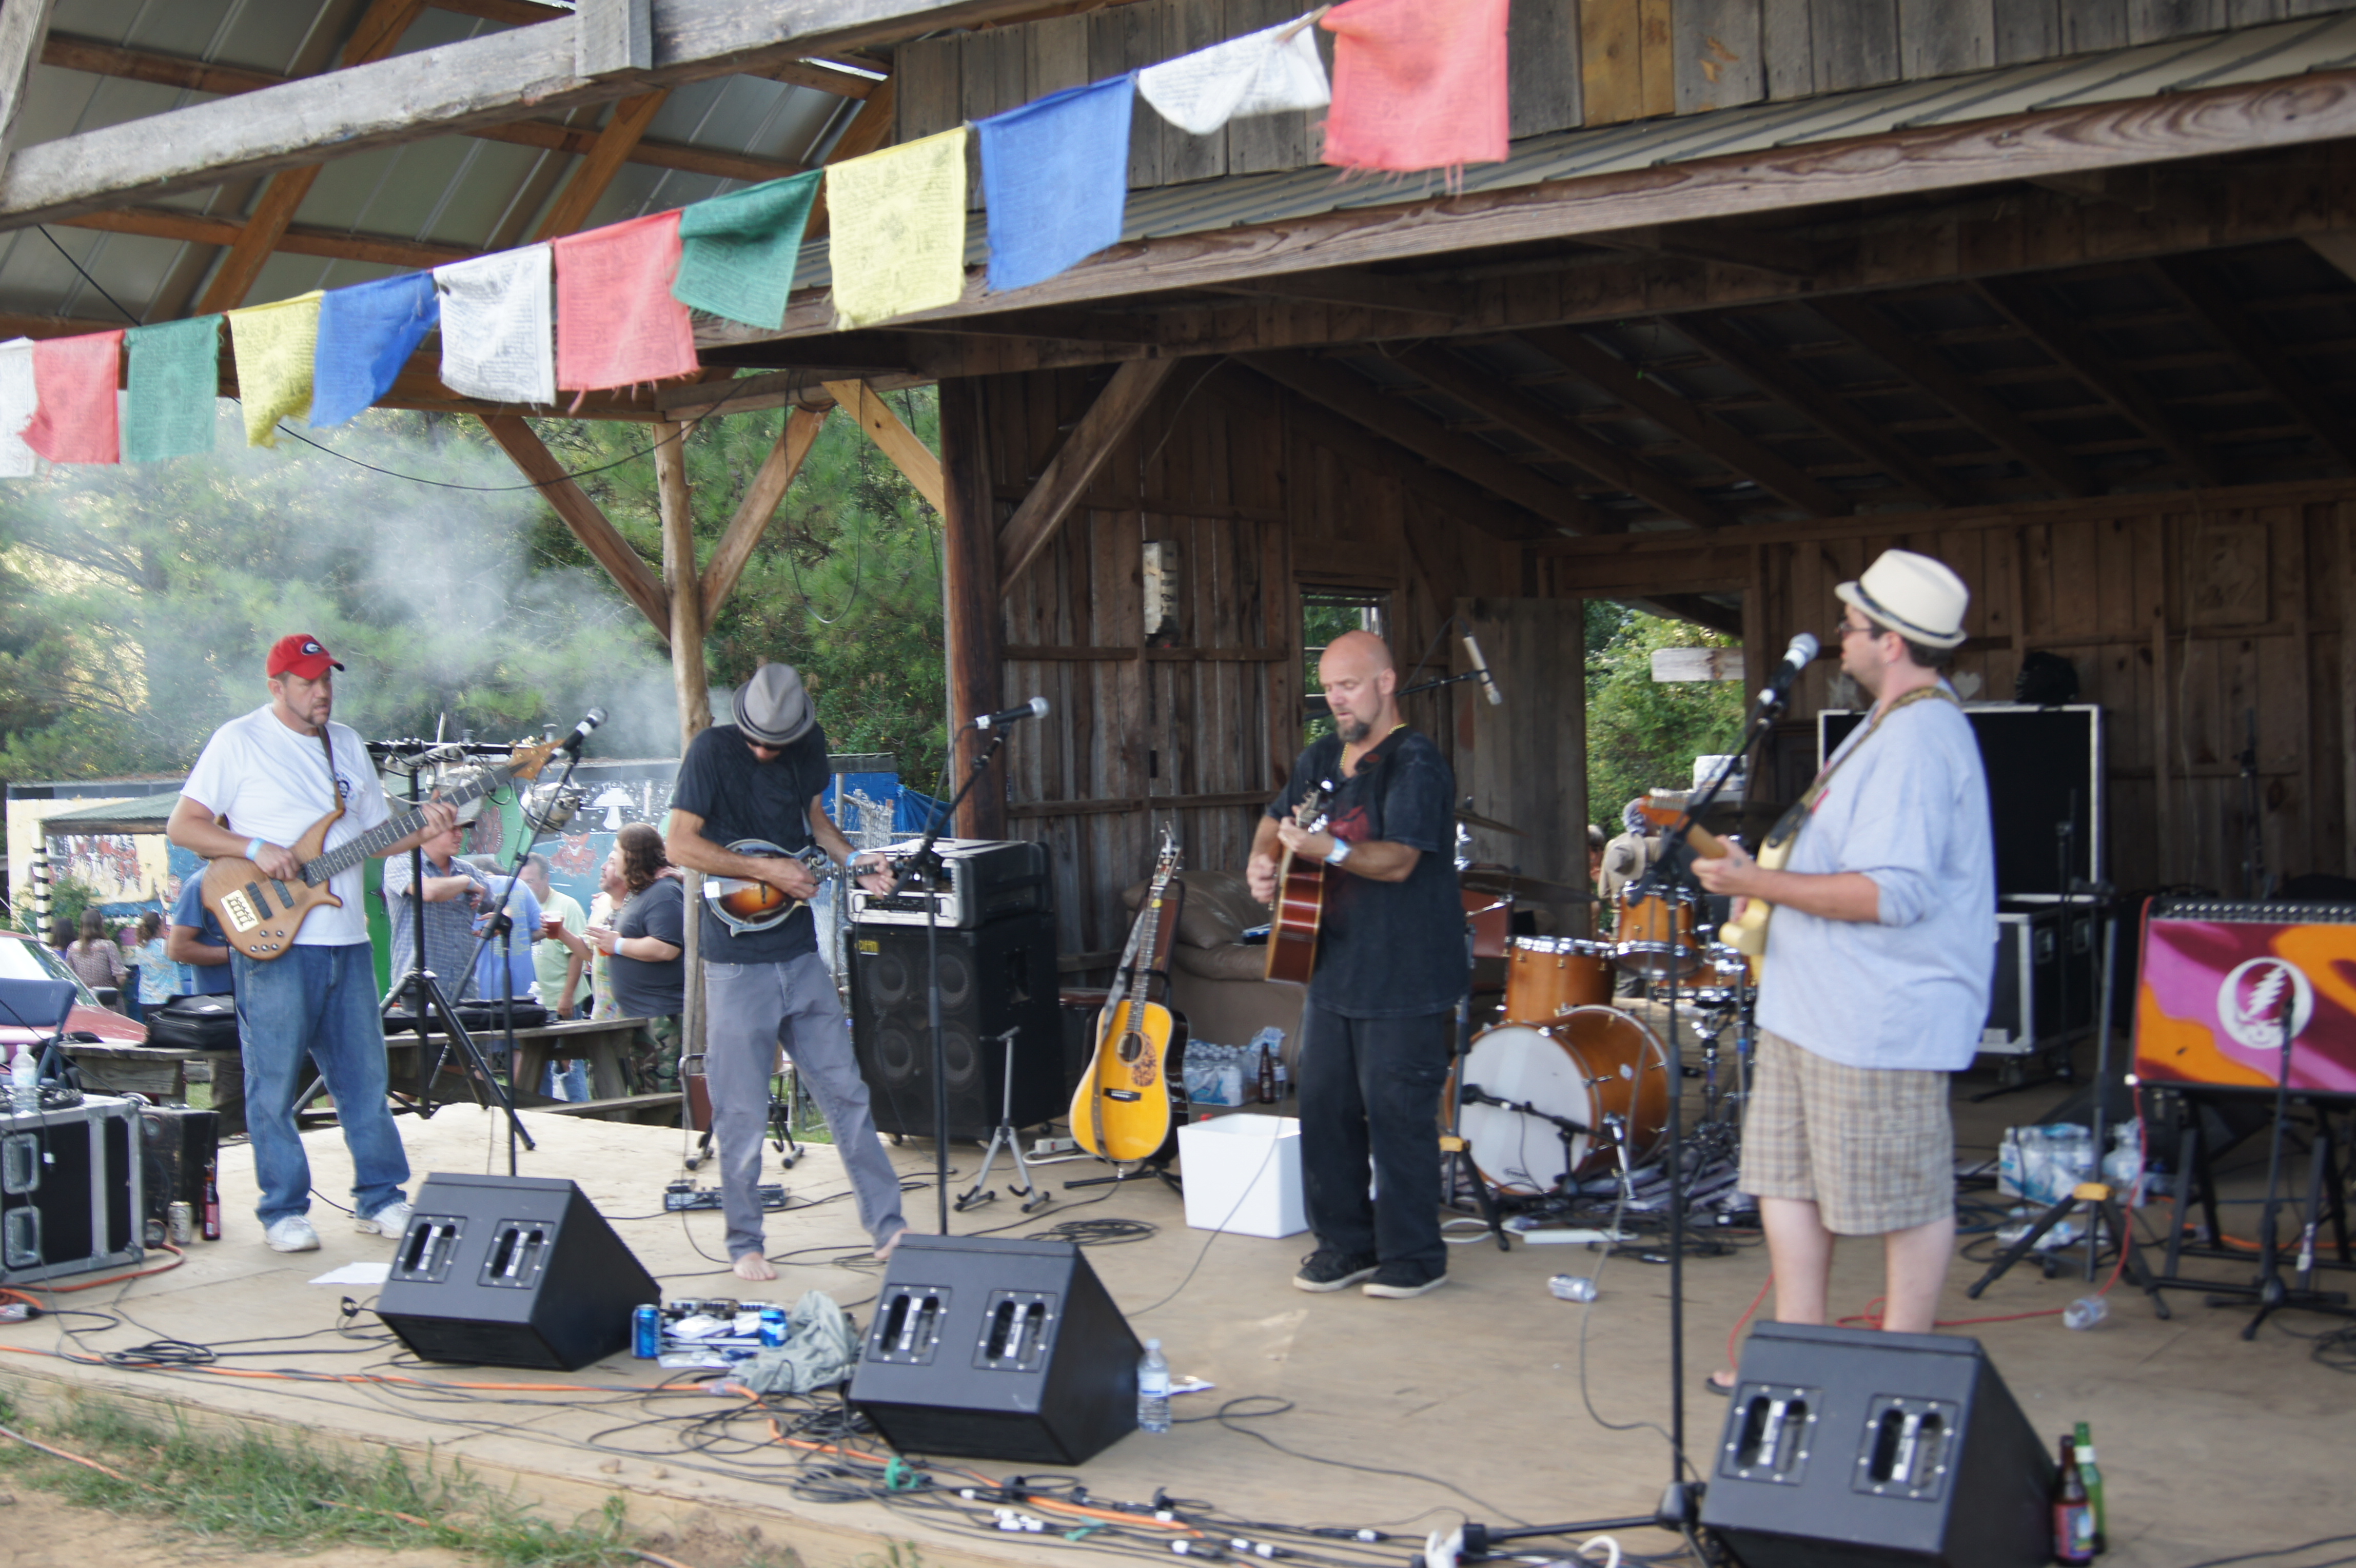 Ralph and friends on stage at Cherokee Farms